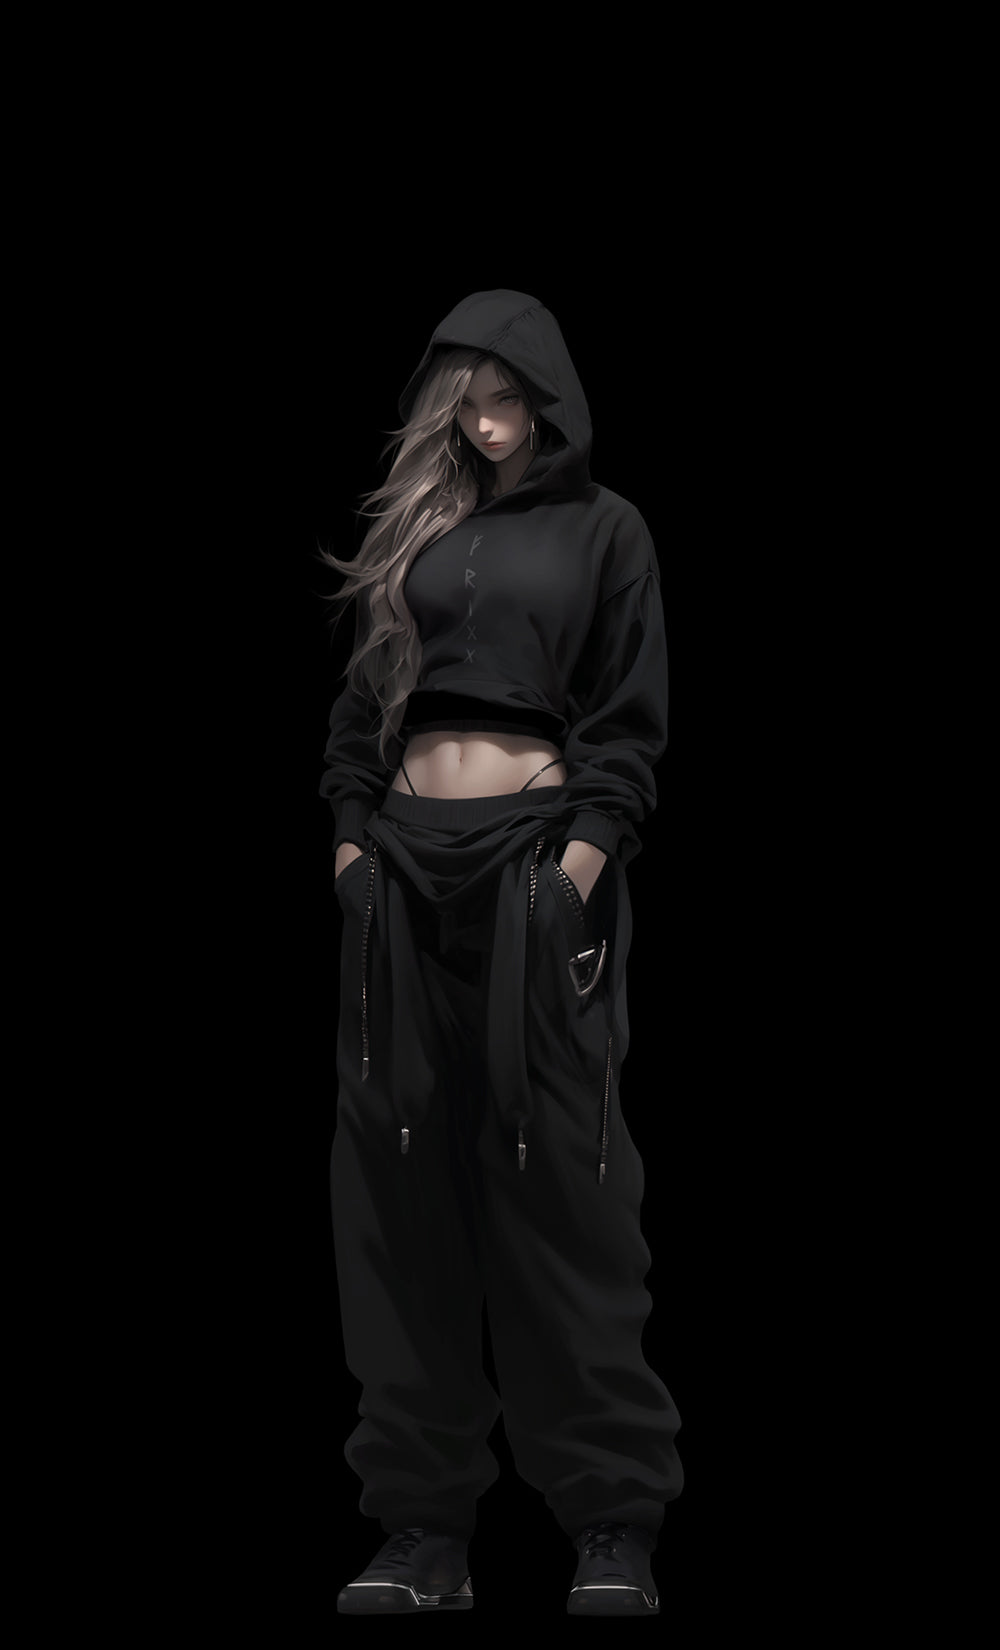 Elevate your style with our Black Frigg Hoodie adorned with an intricate Elder Futhark Rune design, evoking the power and mystique of the ancient Viking culture.